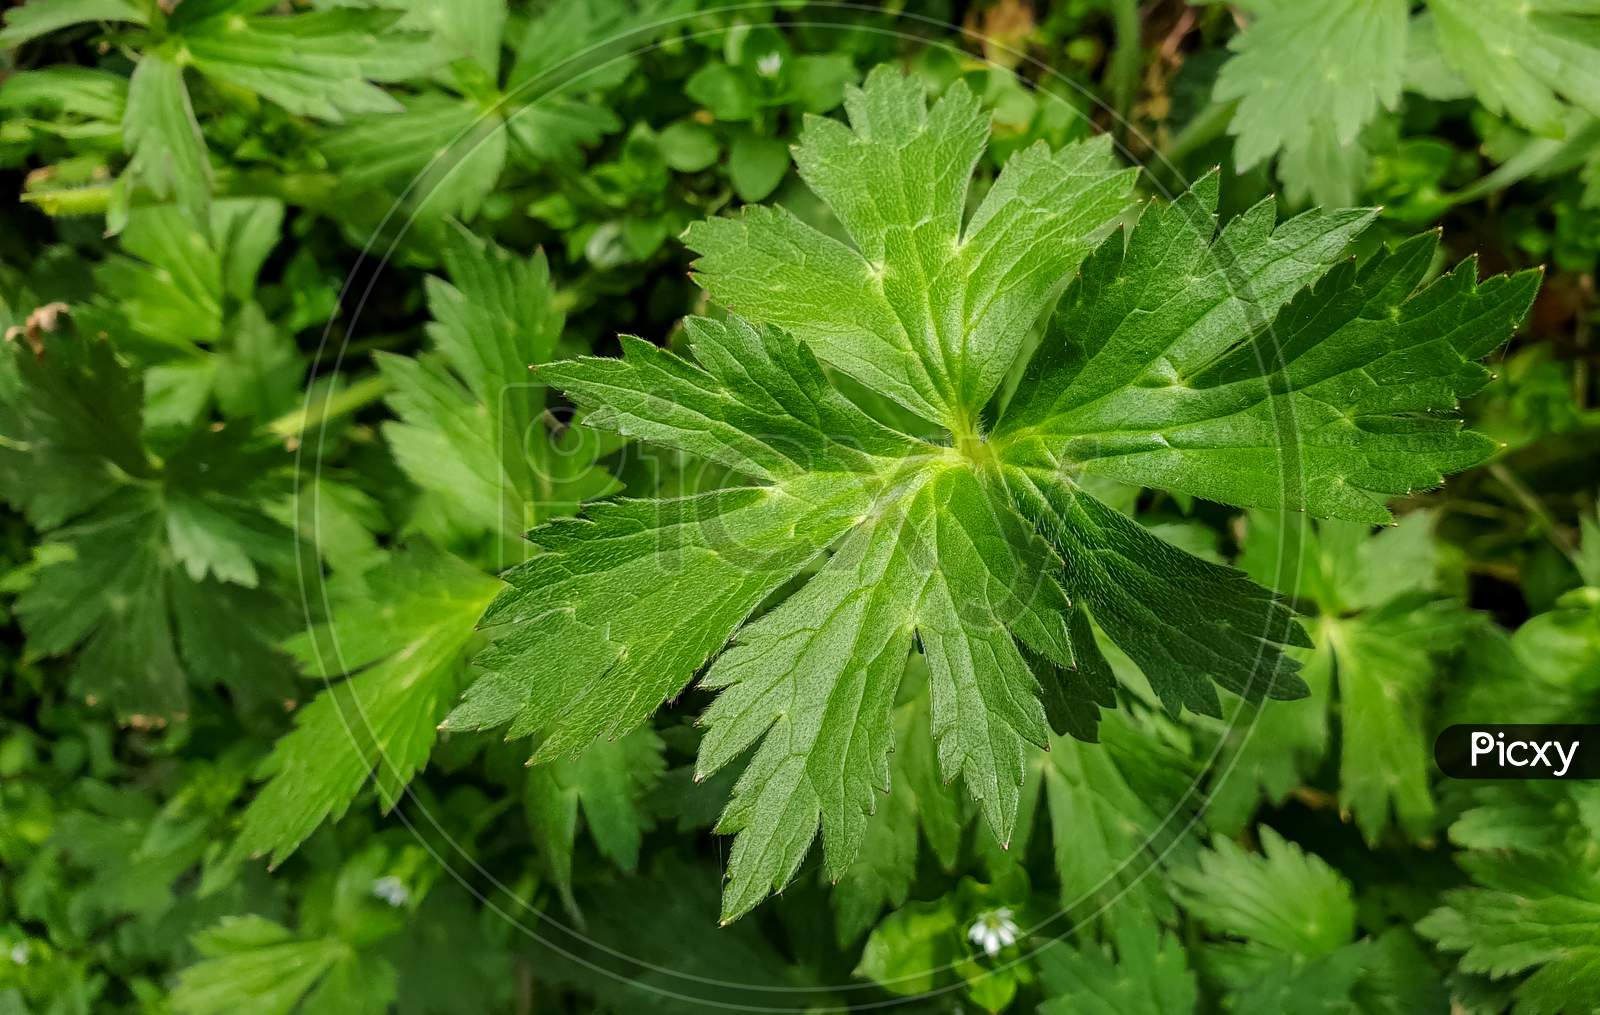 Beautiful green leaves in garden in hilly area of Himachal pradesh, India